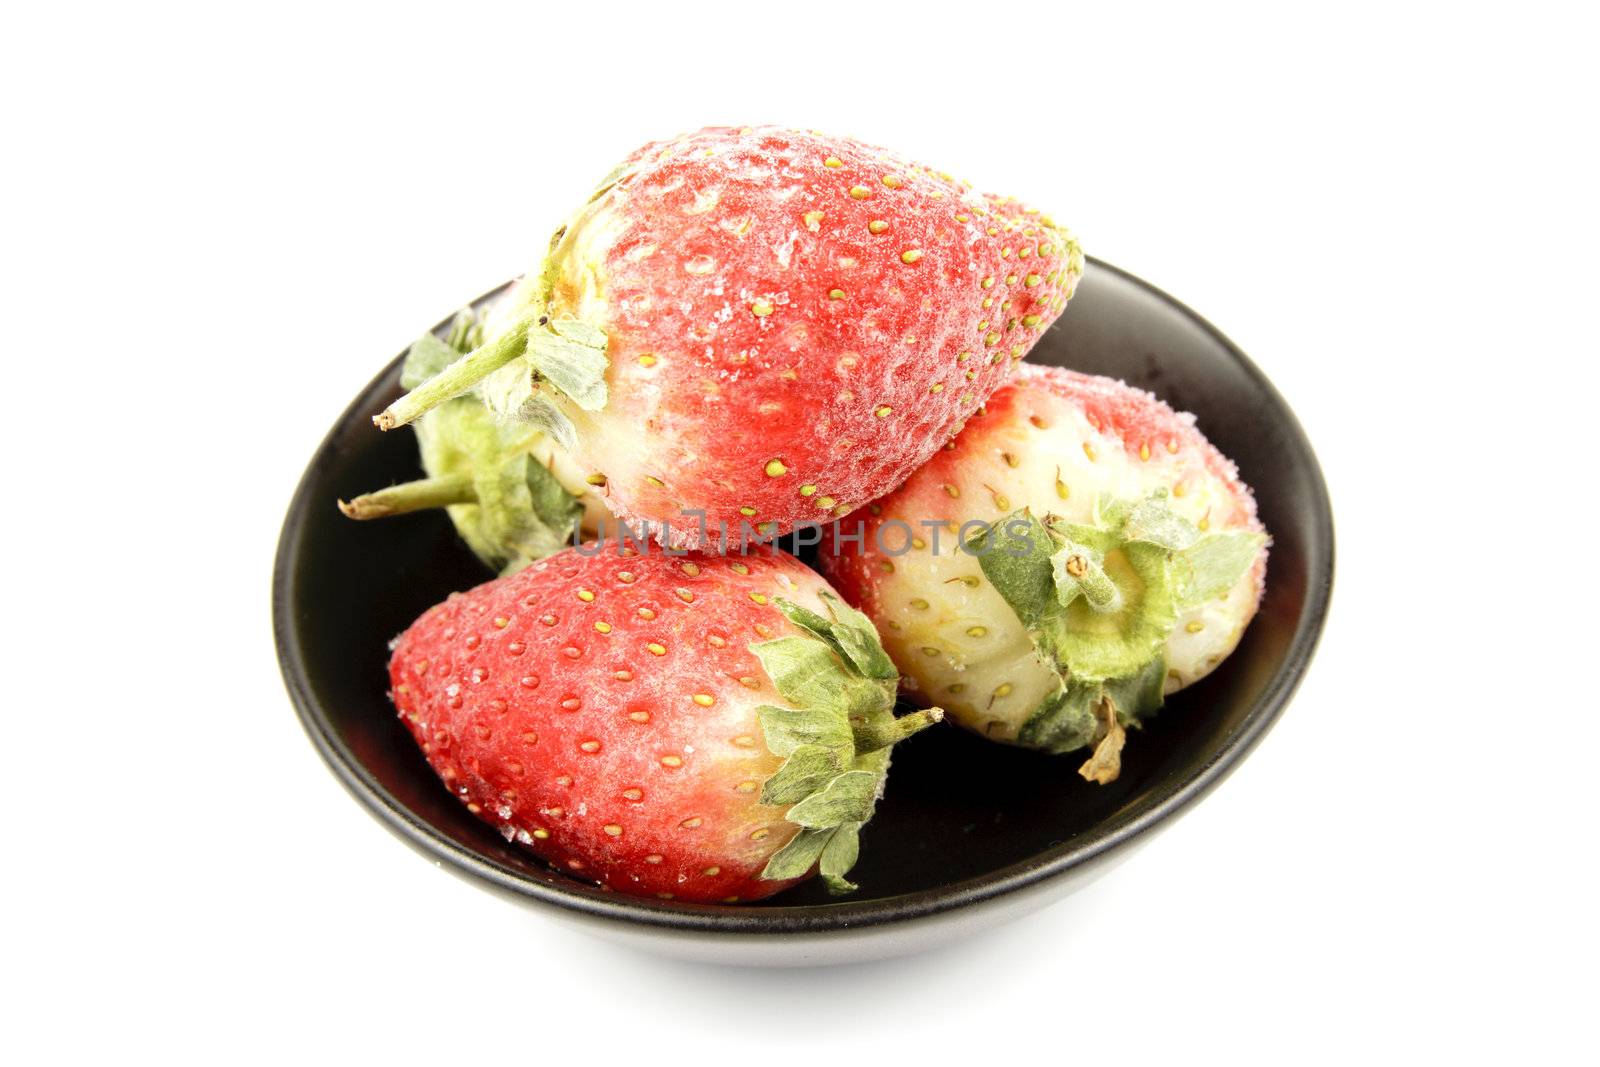 Frozen Strawberries in a Bowl by KeithWilson